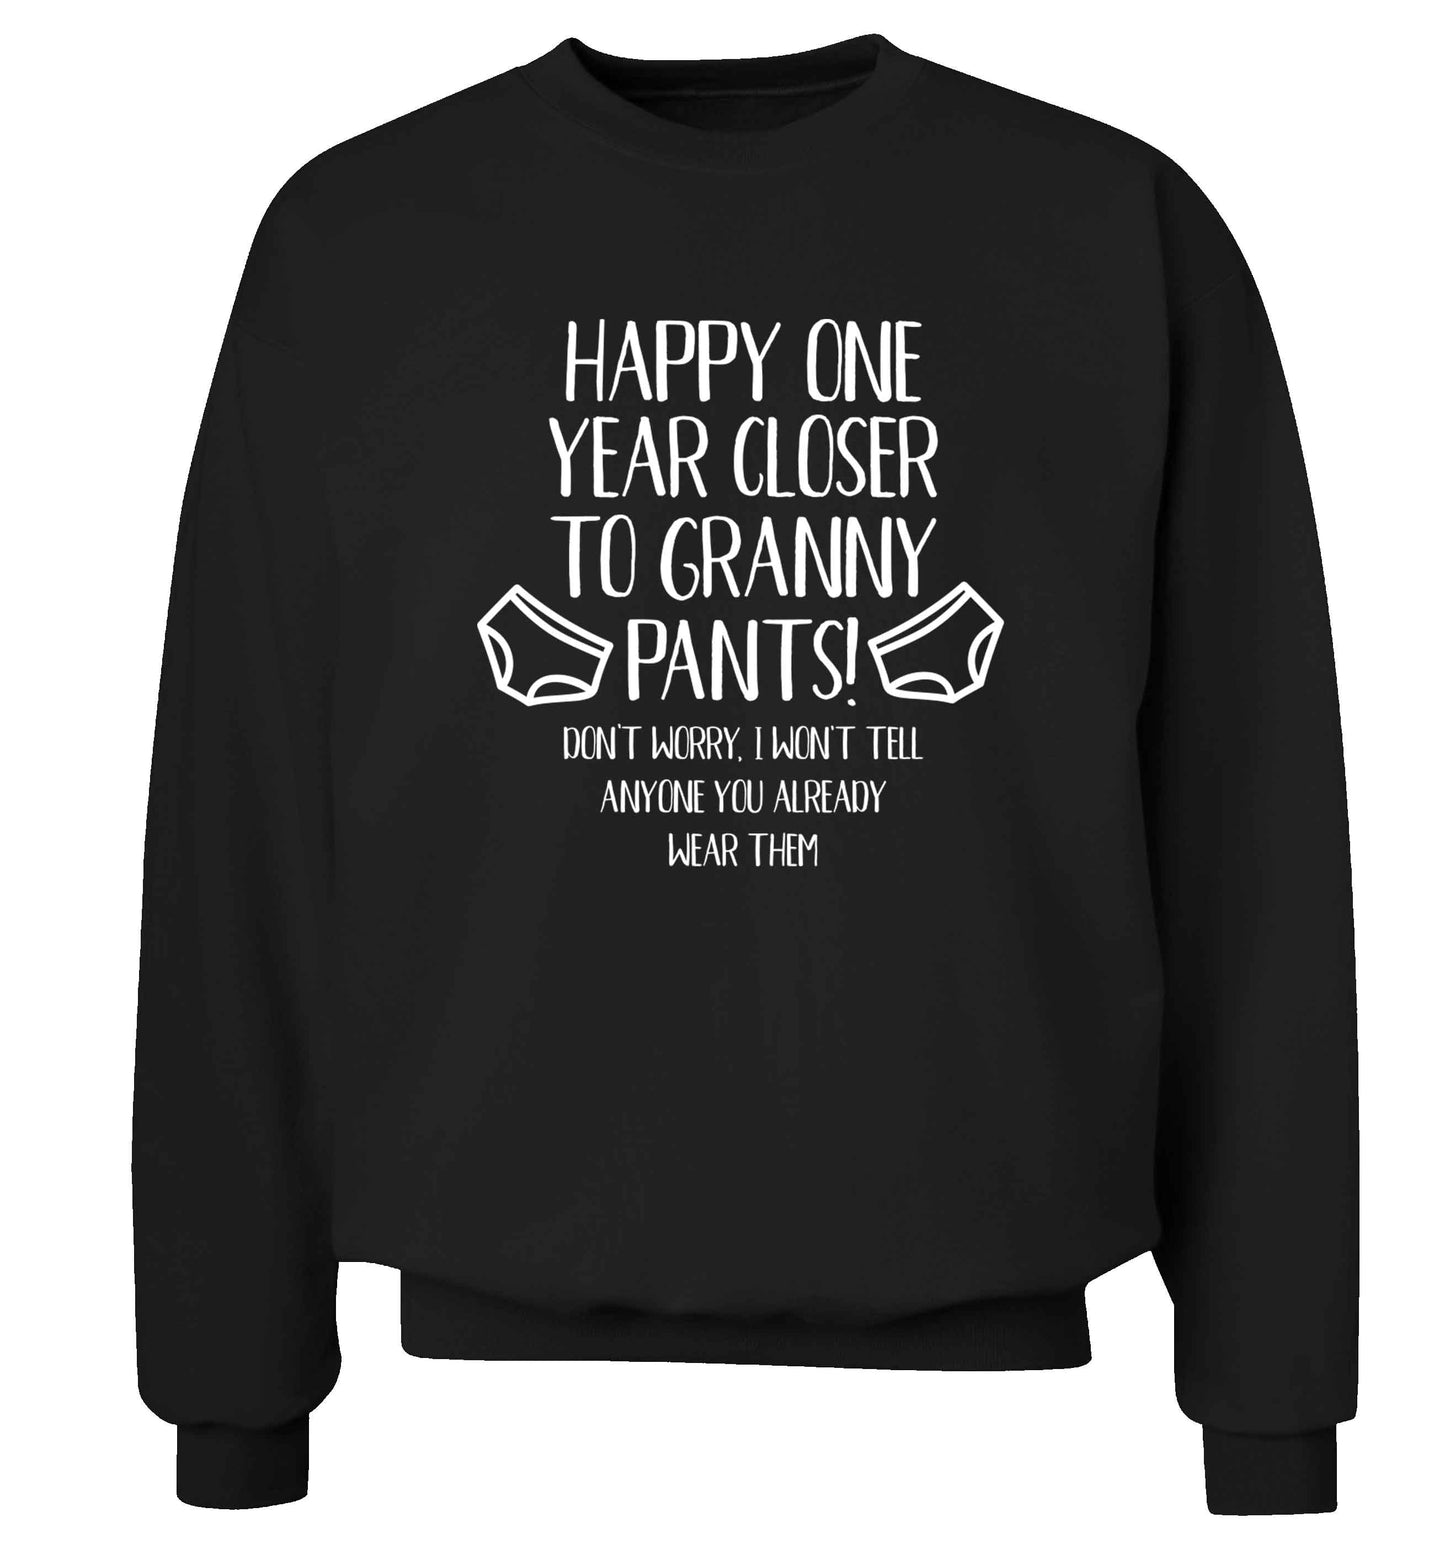 Happy one year closer to granny pants Adult's unisex black Sweater 2XL